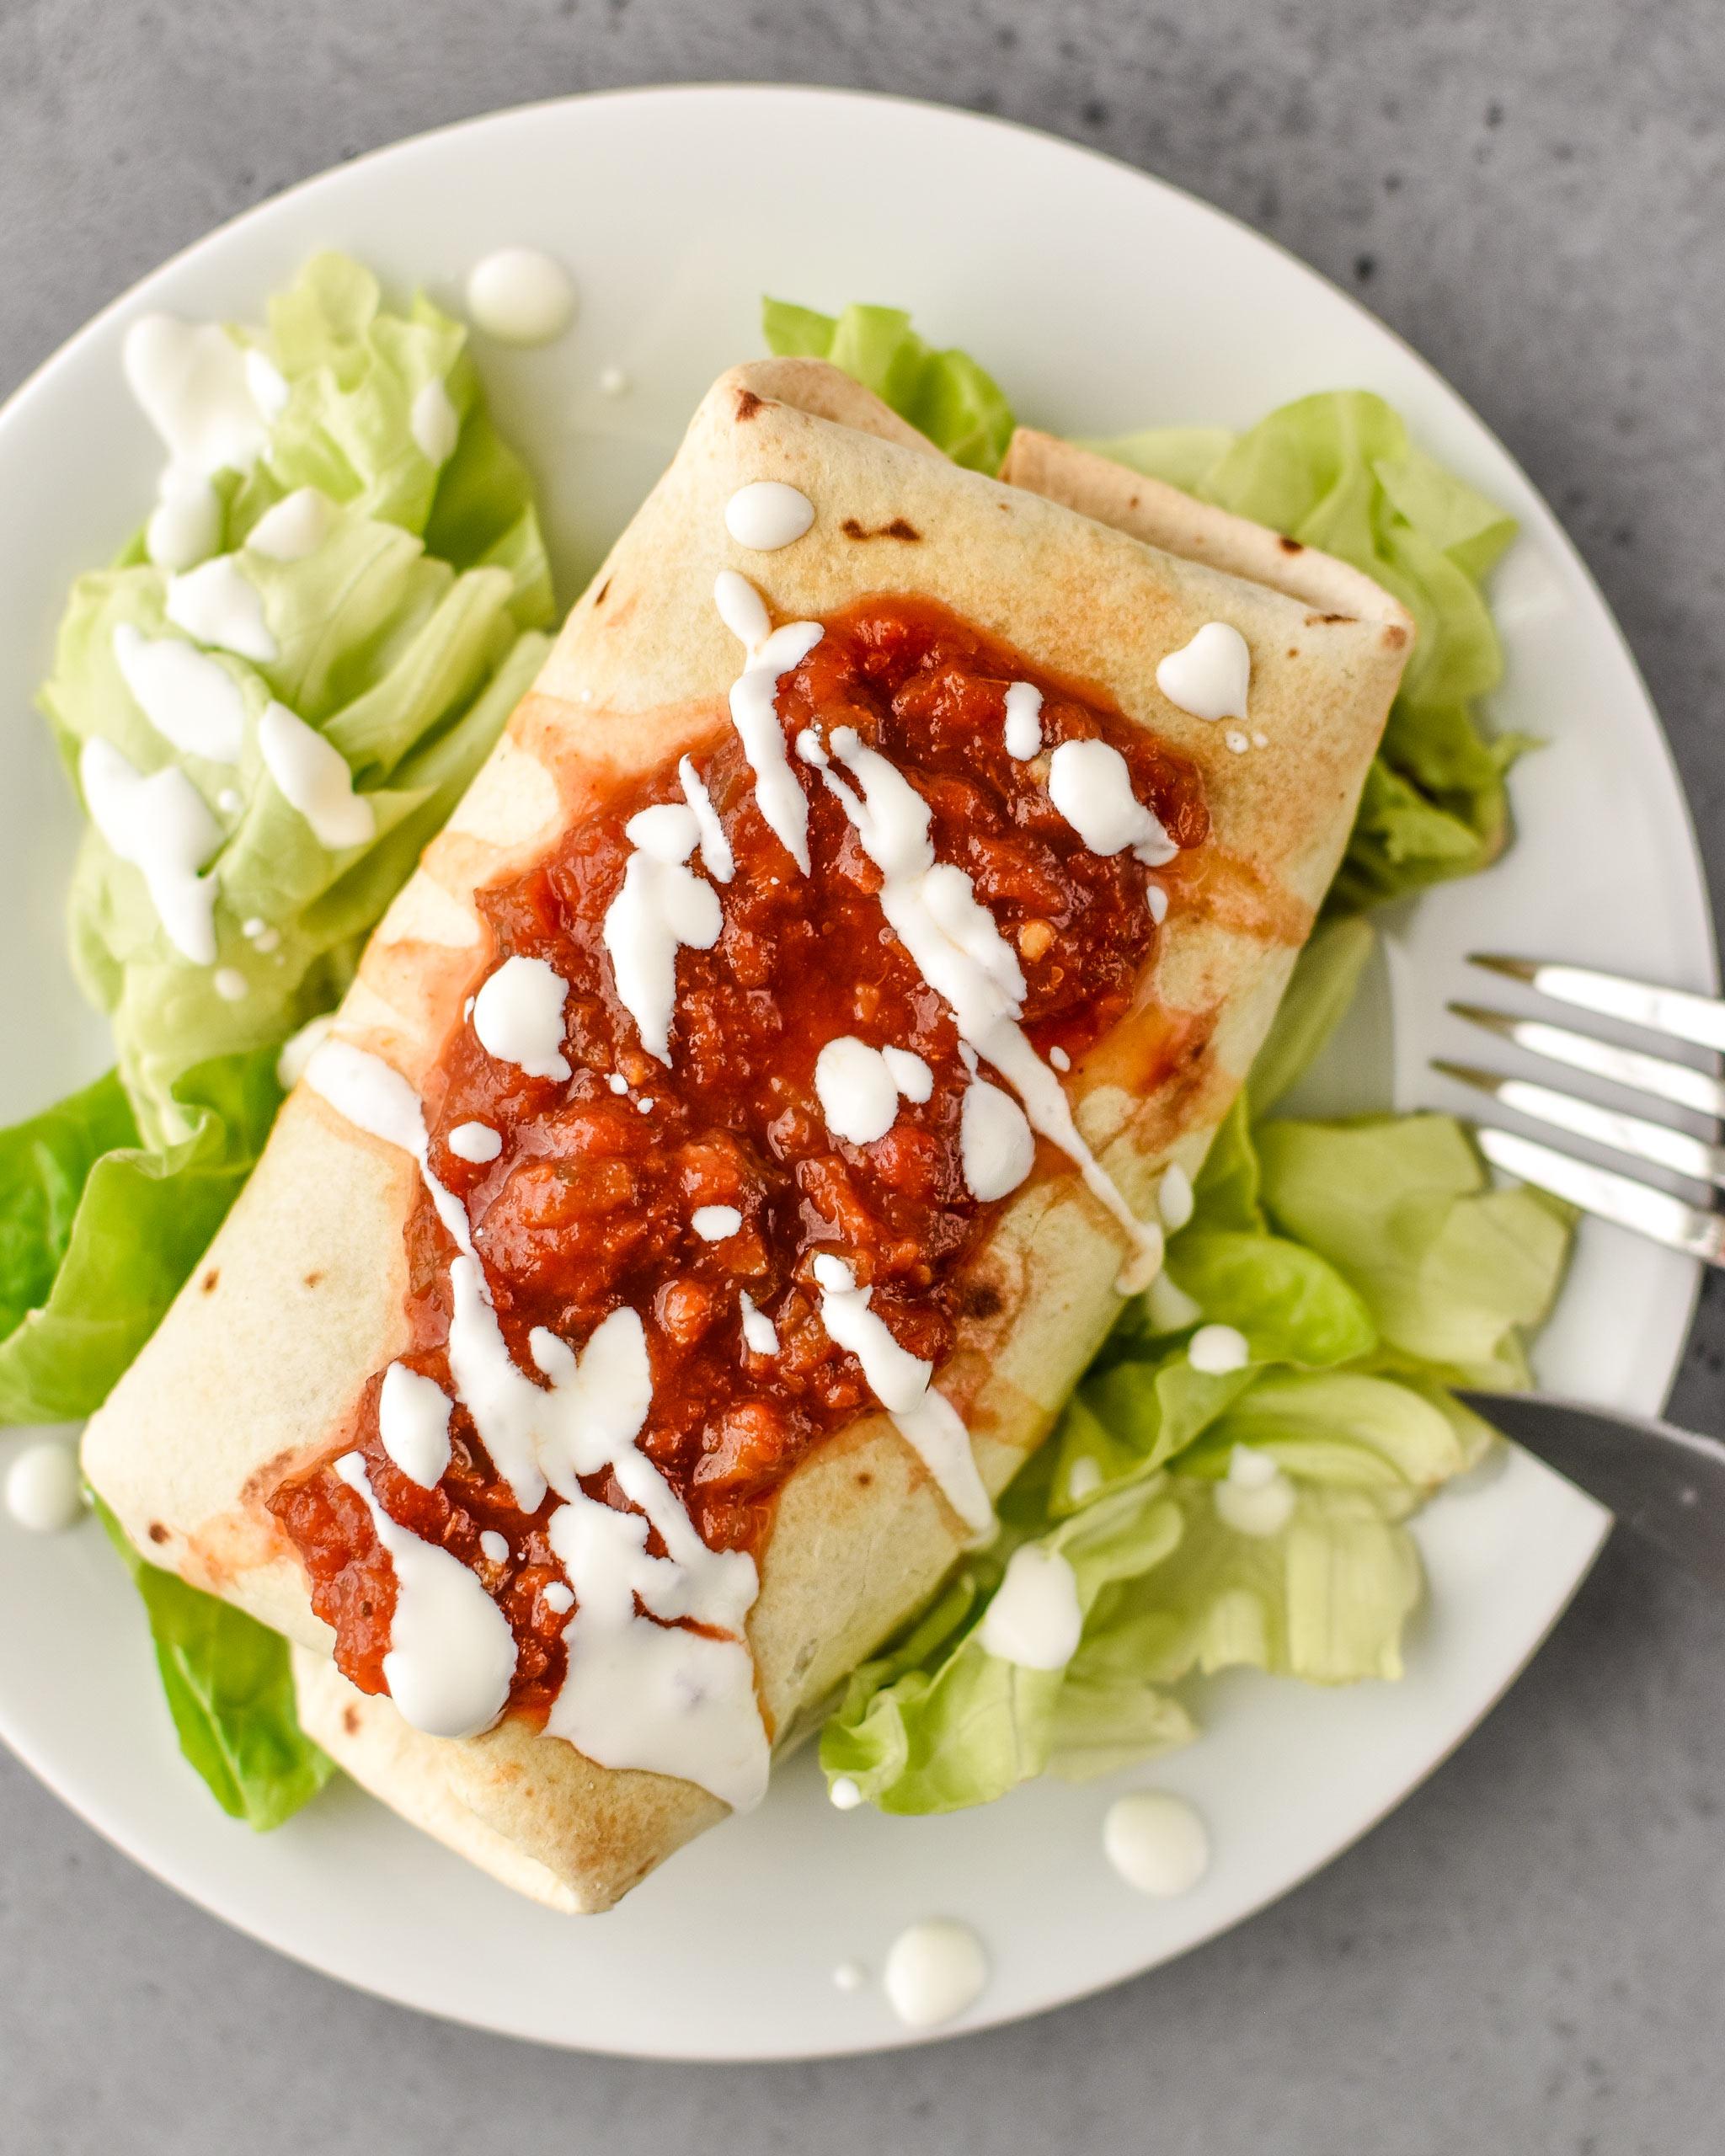 How to make chimichangas in an air fryer - chimichanga with salsa and lettuce